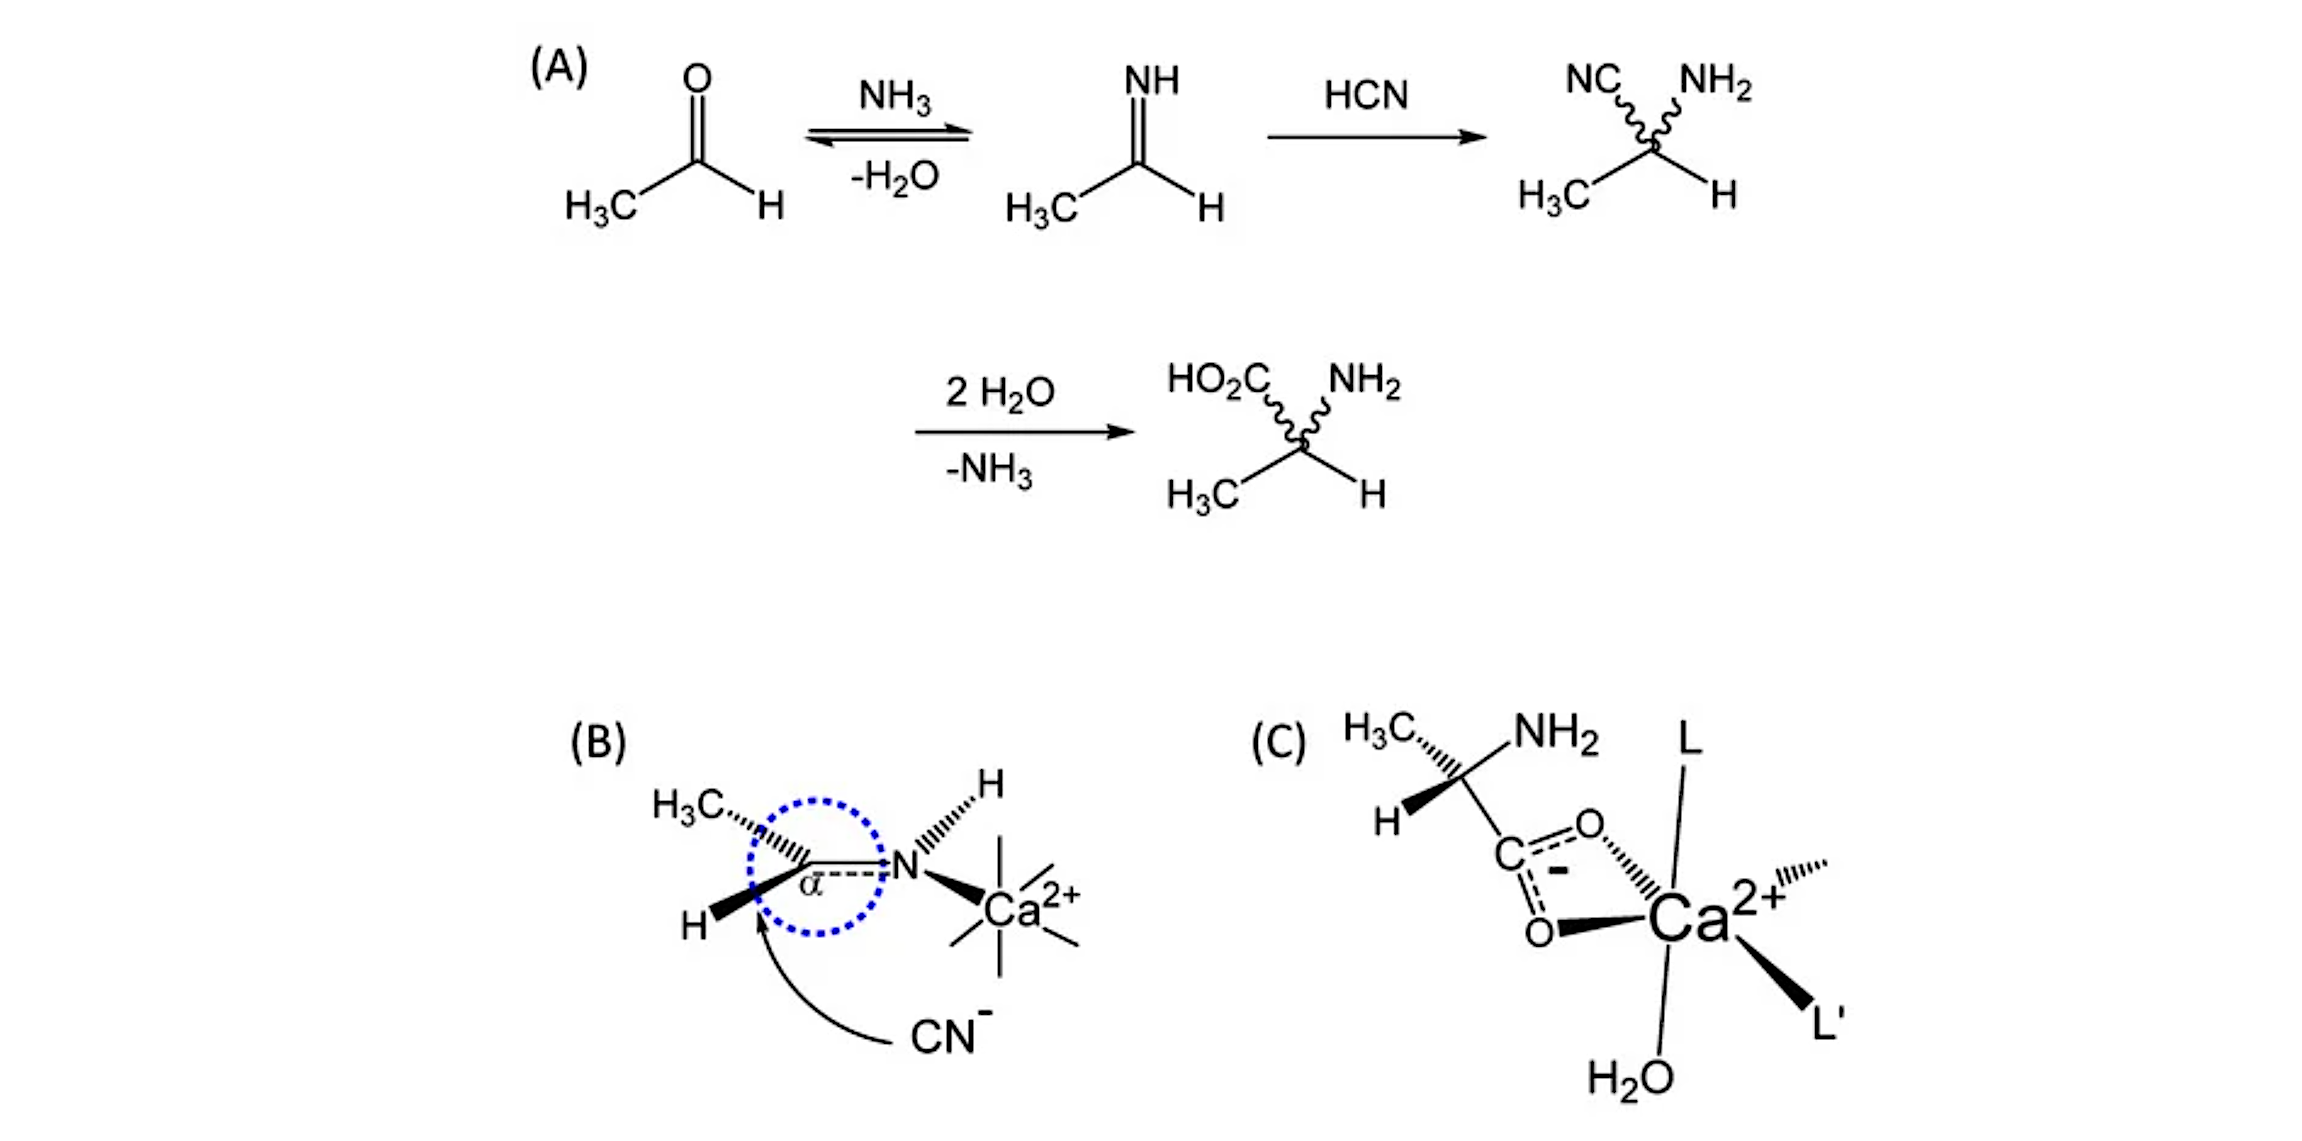 Influence of the Weak Nuclear Force on Metal-Promoted Autocatalytic Strecker Synthesis of Amino Acids: Formation of a Chiral Pool of Precursors for Prebiotic Peptide and Protein Synthesis